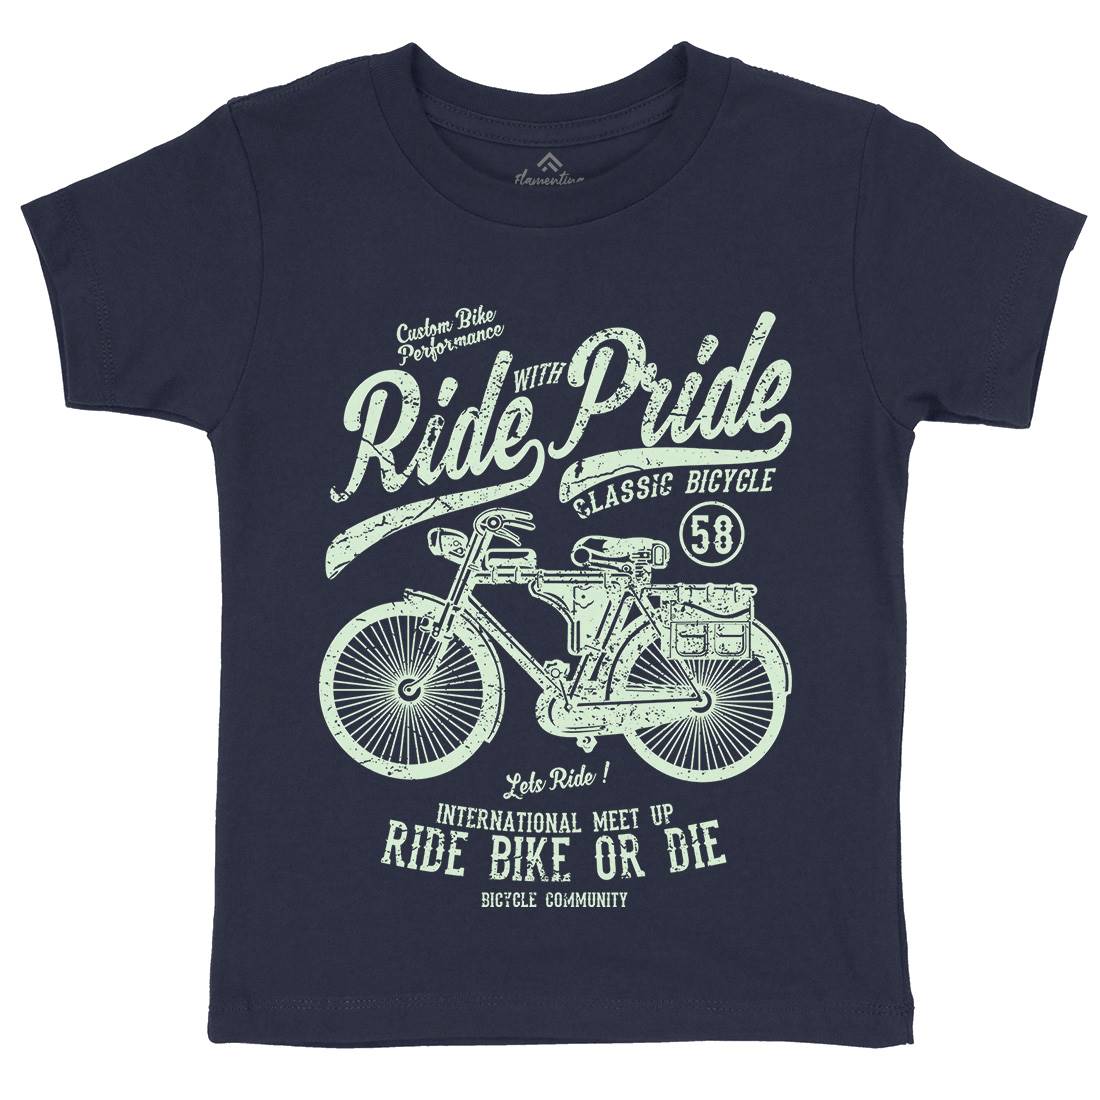 Ride With Pride Kids Organic Crew Neck T-Shirt Bikes A121